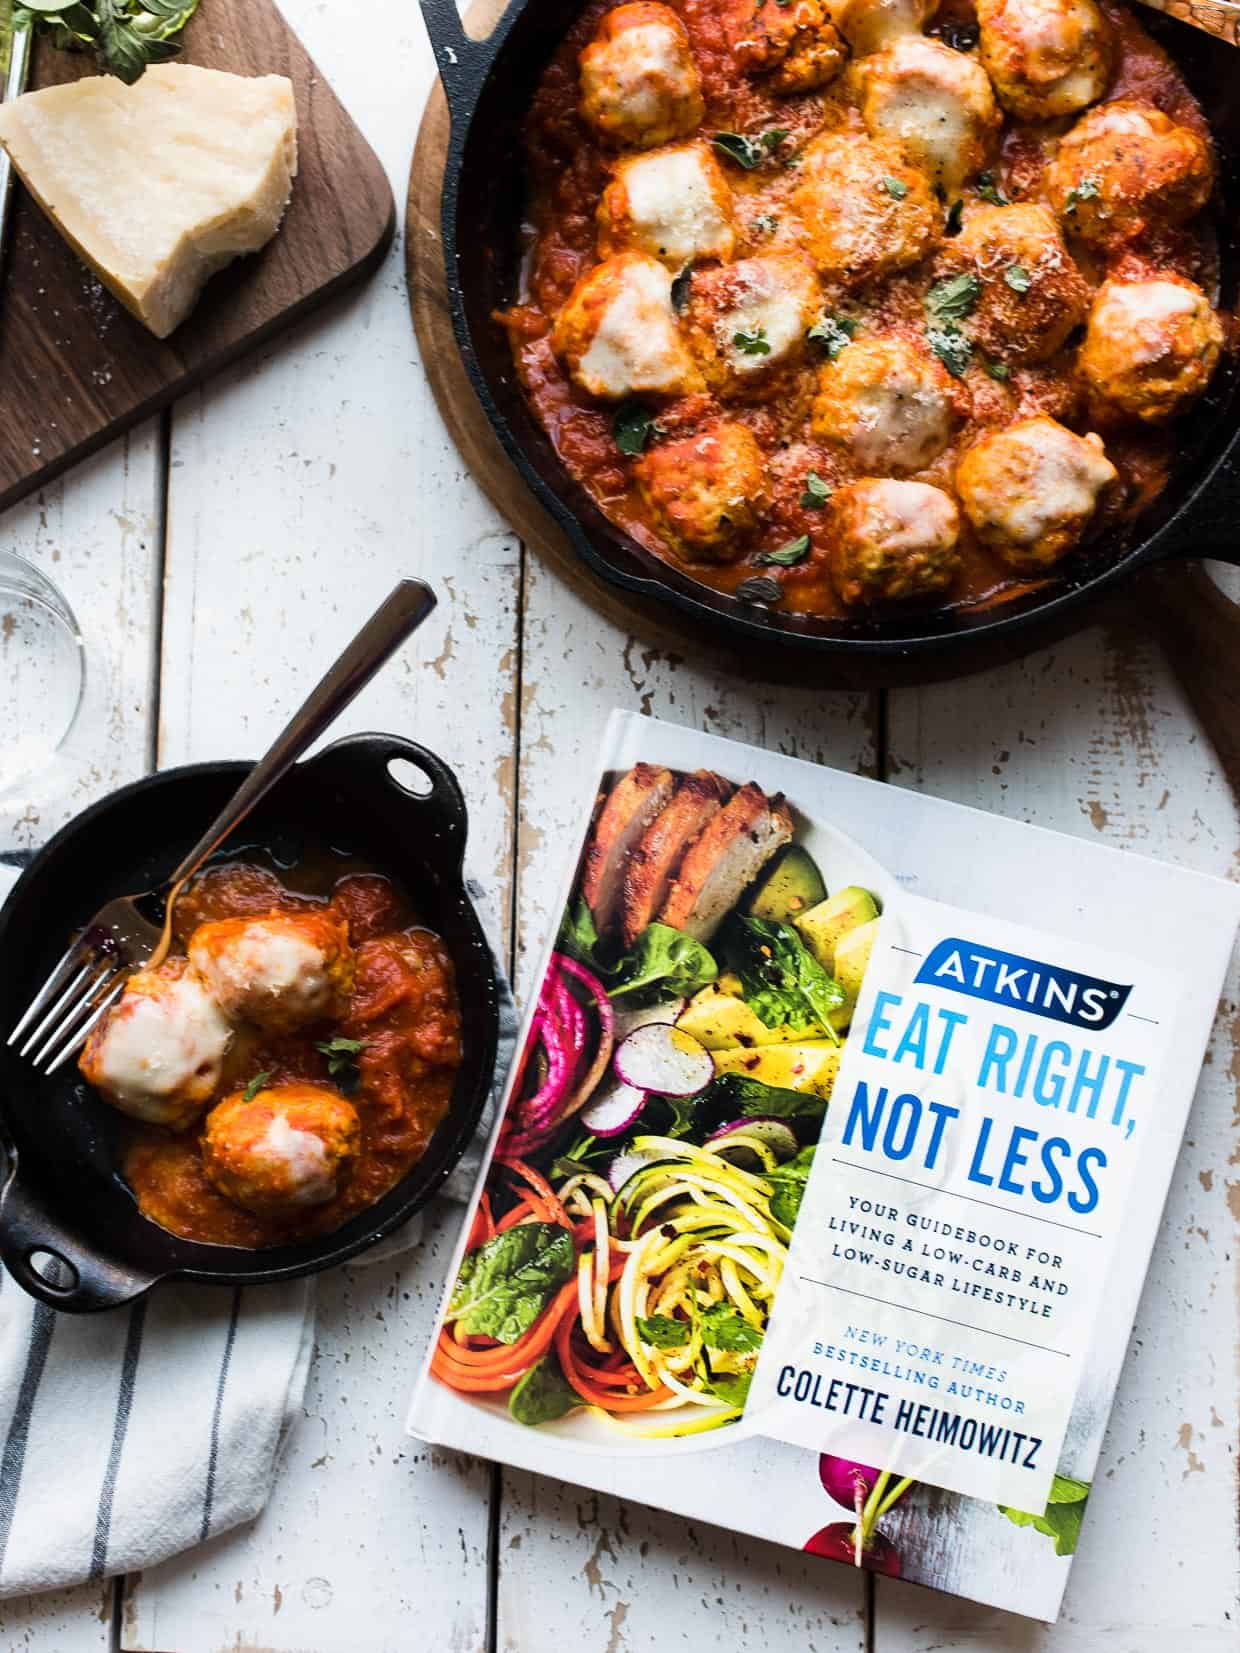 Chicken Parmesan Meatballs in a cast iron skillet next to a copy of Atkins: Eat Right, Not Less guidebook